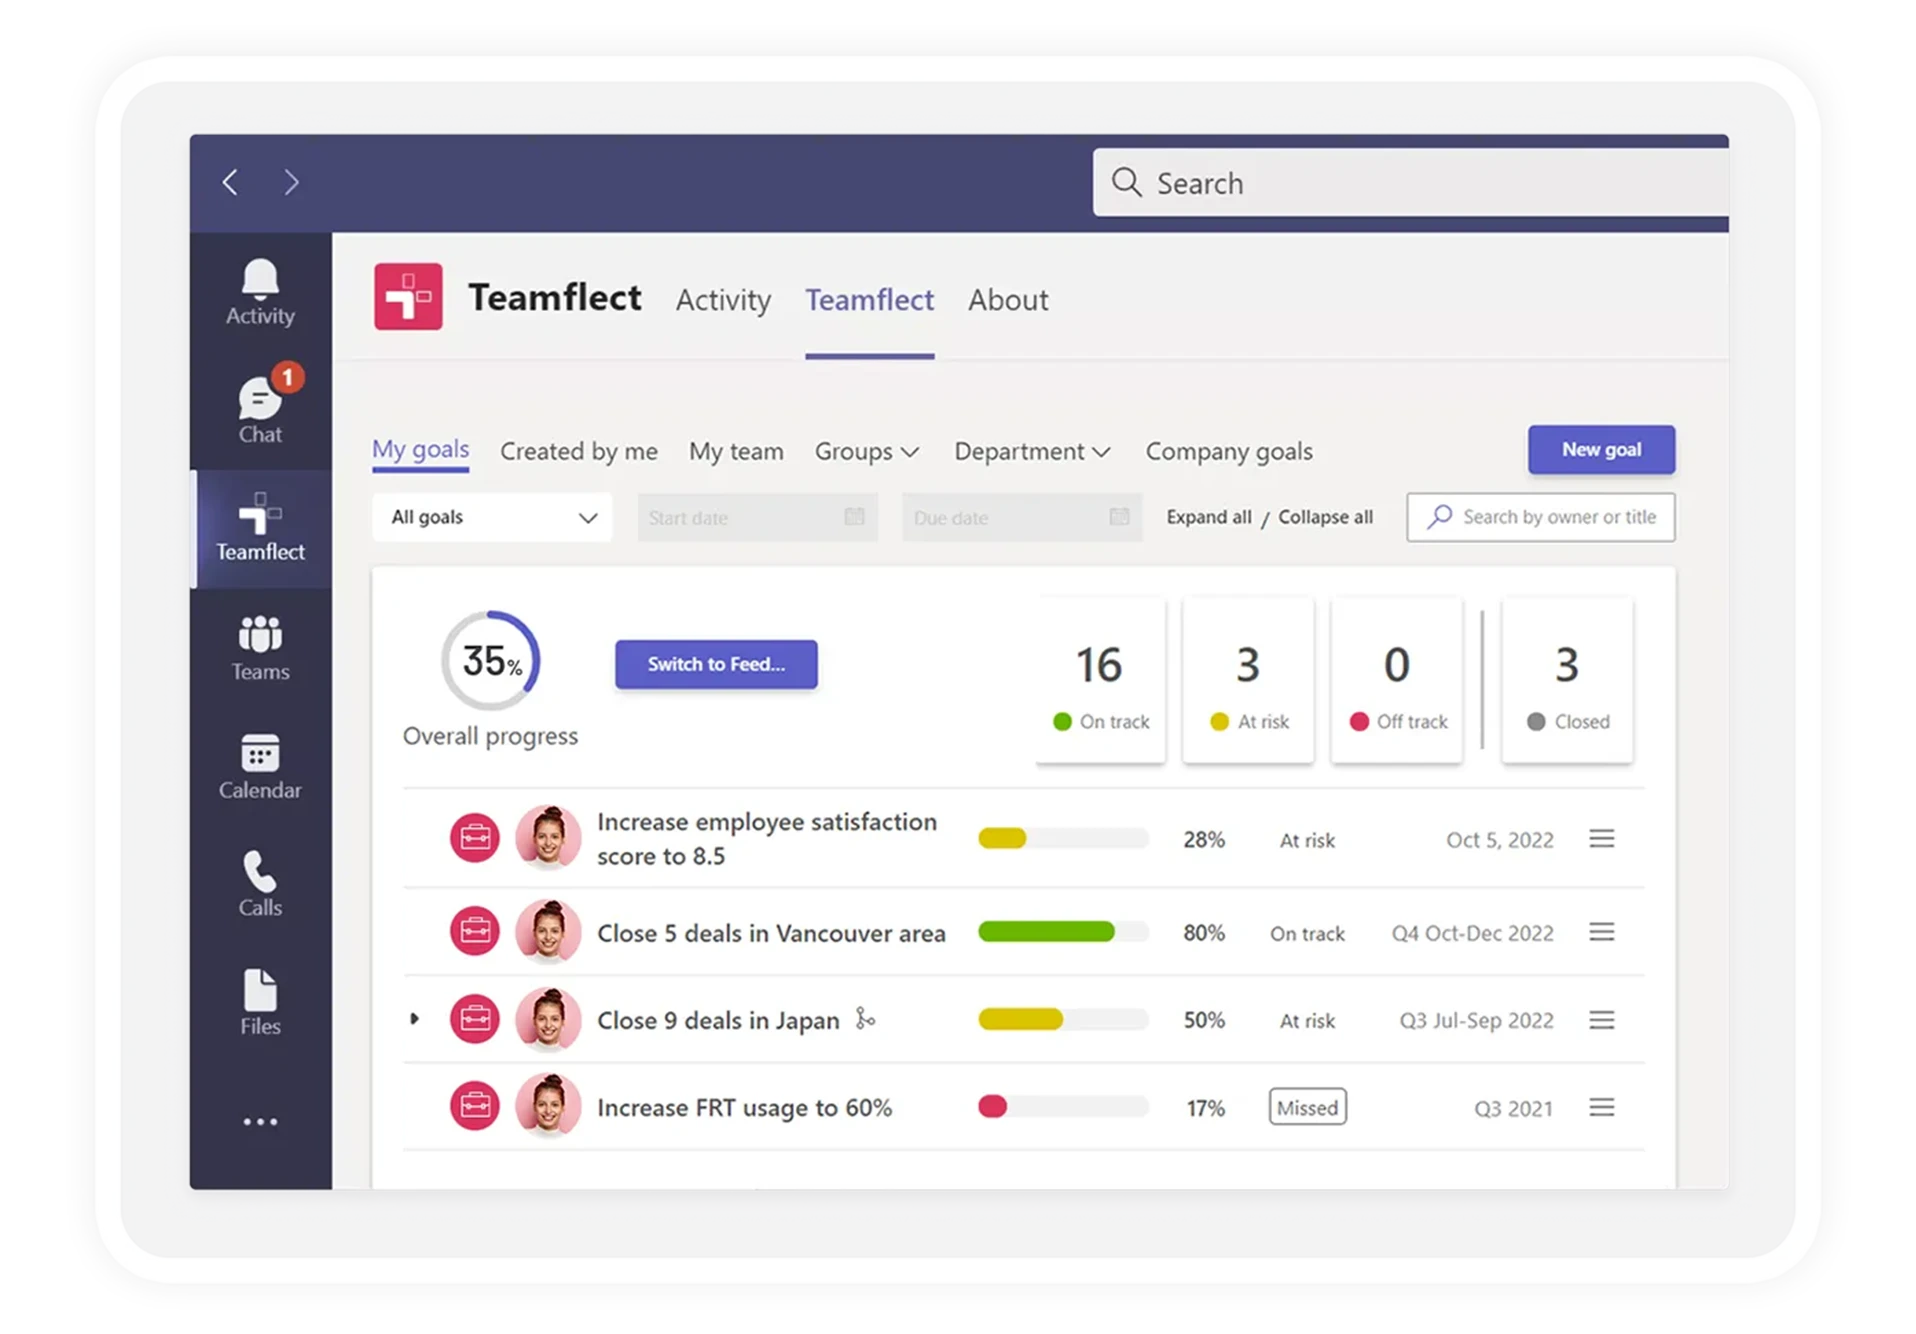 Best OKR Software: Goal module screen of Teamflect in Microsoft Teams with one active goal